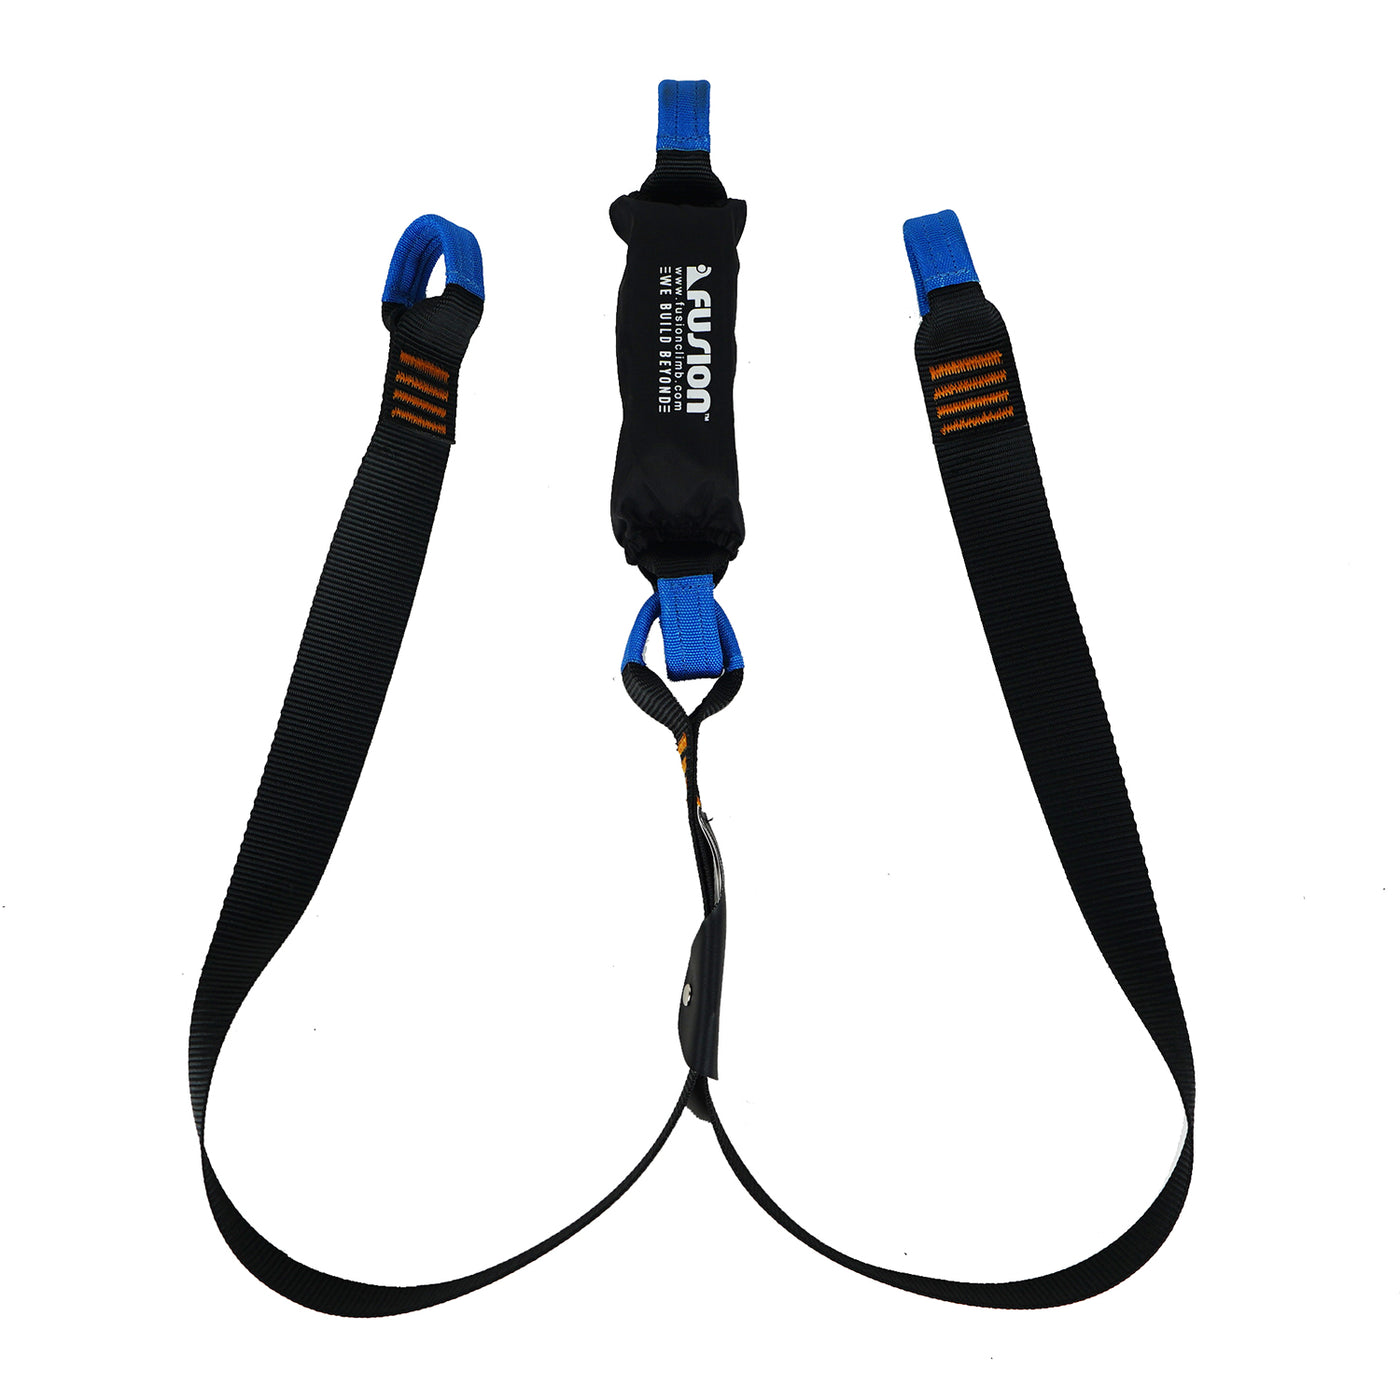 Double Legged Shock Absorbing Lanyard with hitched loops